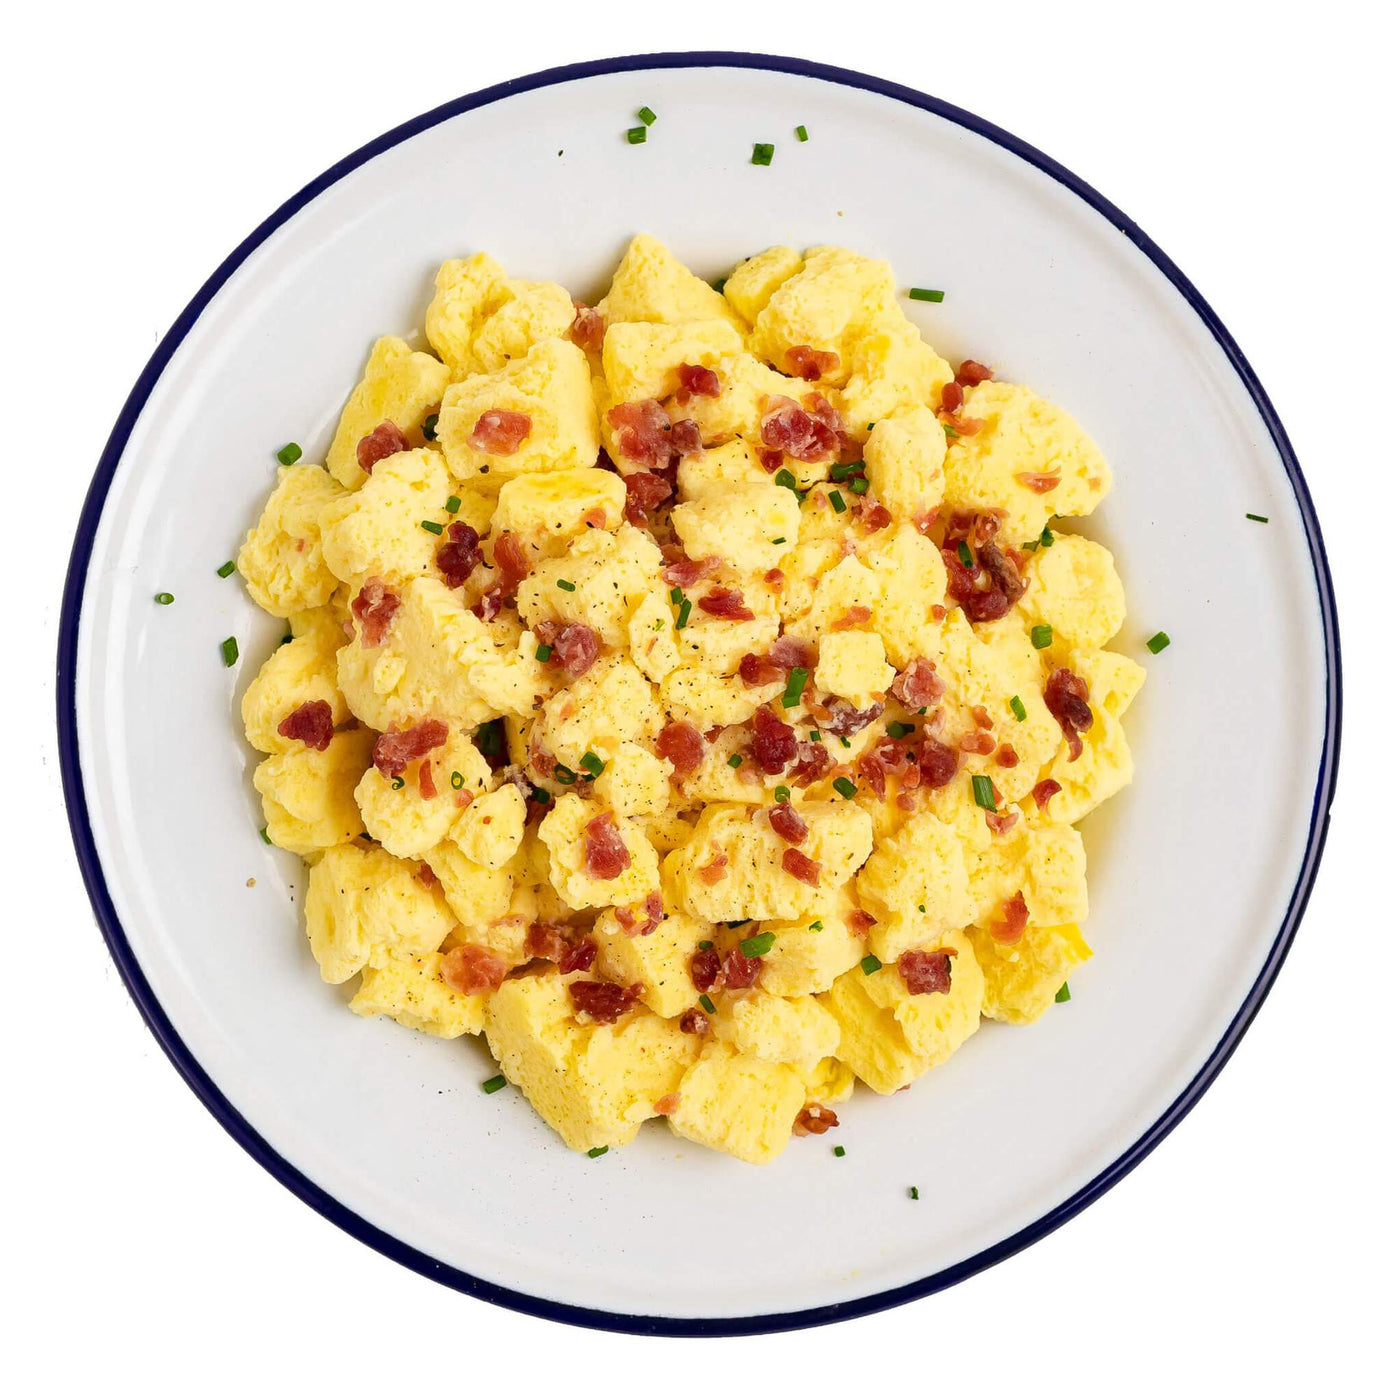 Mountain House Scrambled Eggs with Bacon Adventure Meal